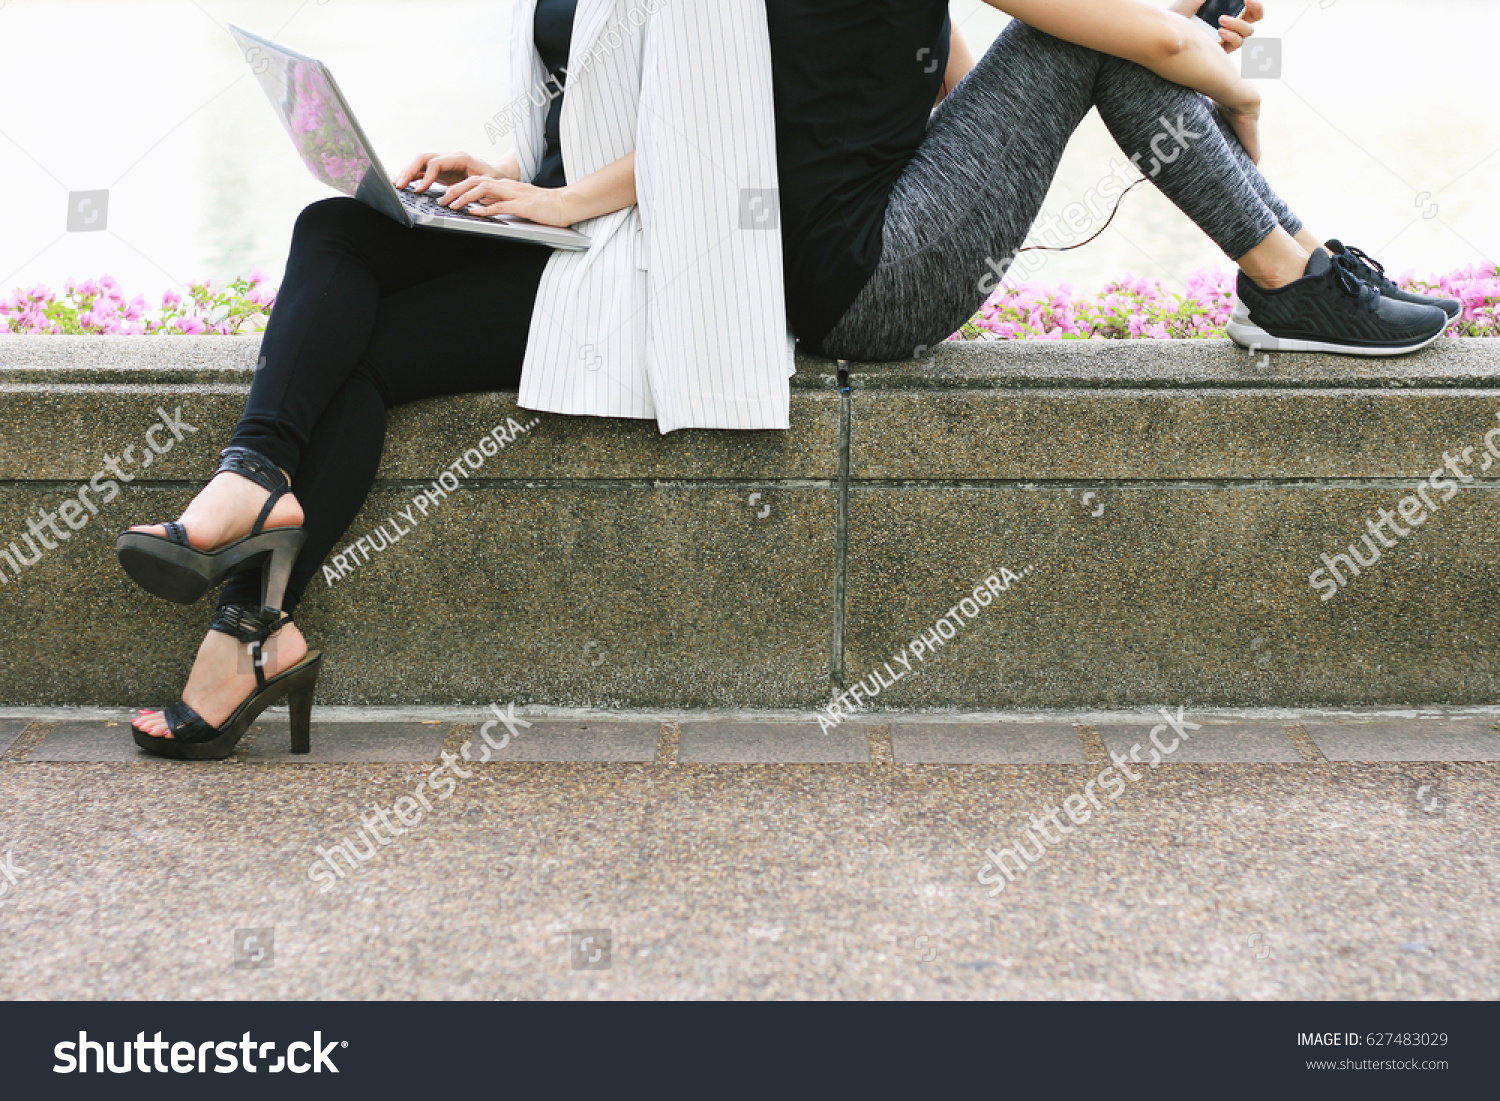 Business woman working on the laptop computer sitting near the relaxing sport woman in city park, Life balance concept, Workaholic and healthy lifestyle. #627483029